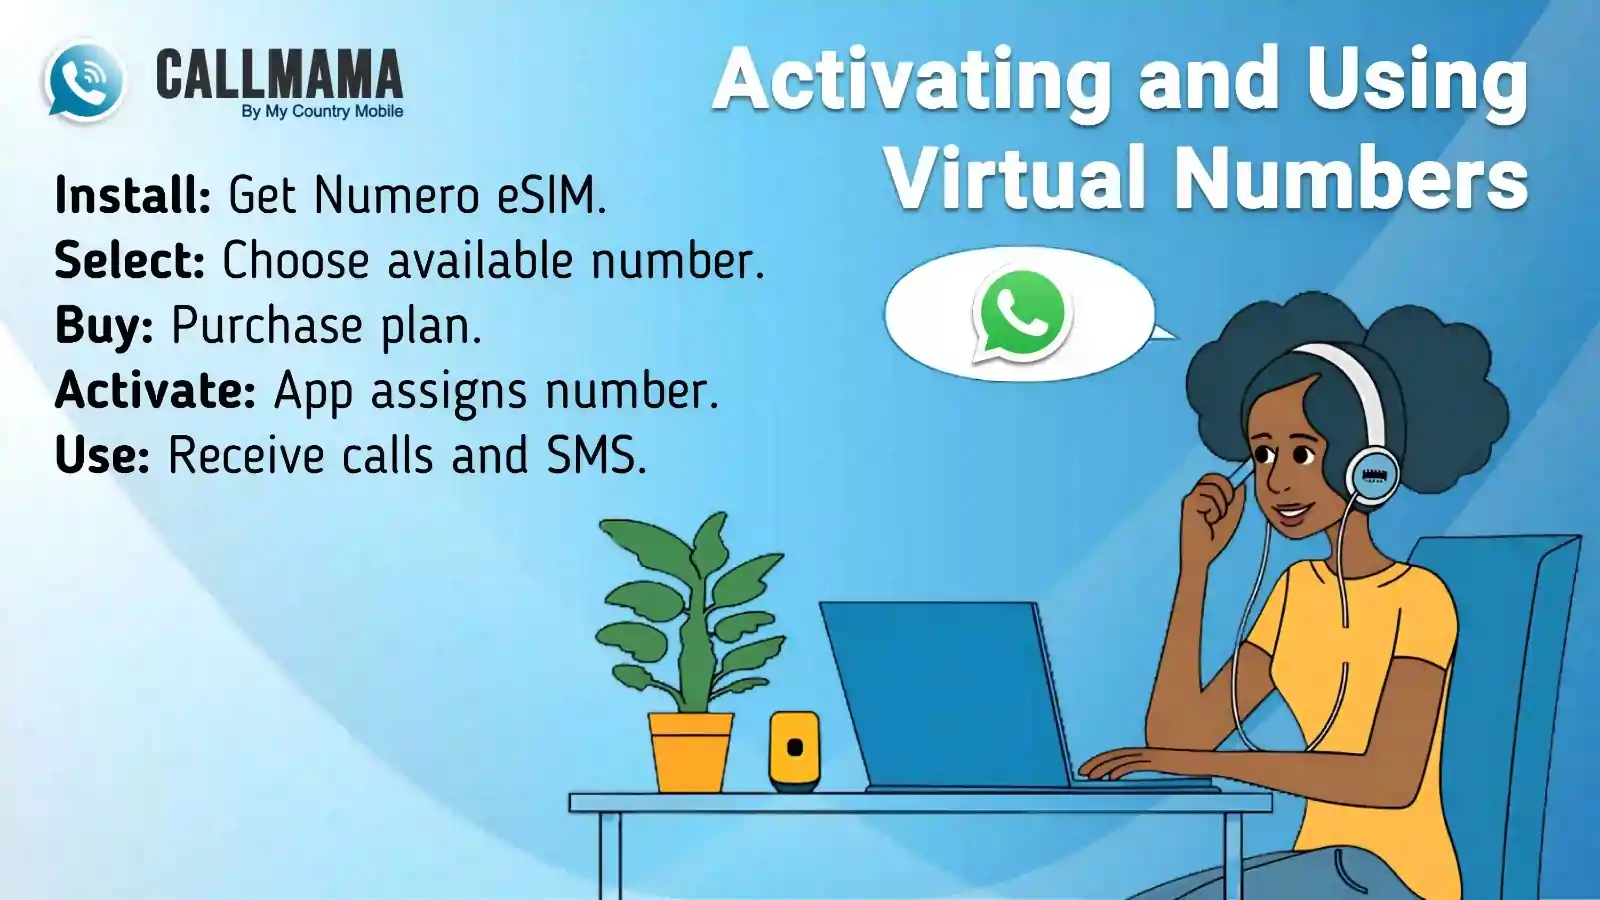 Activating and Using Virtual Numbers